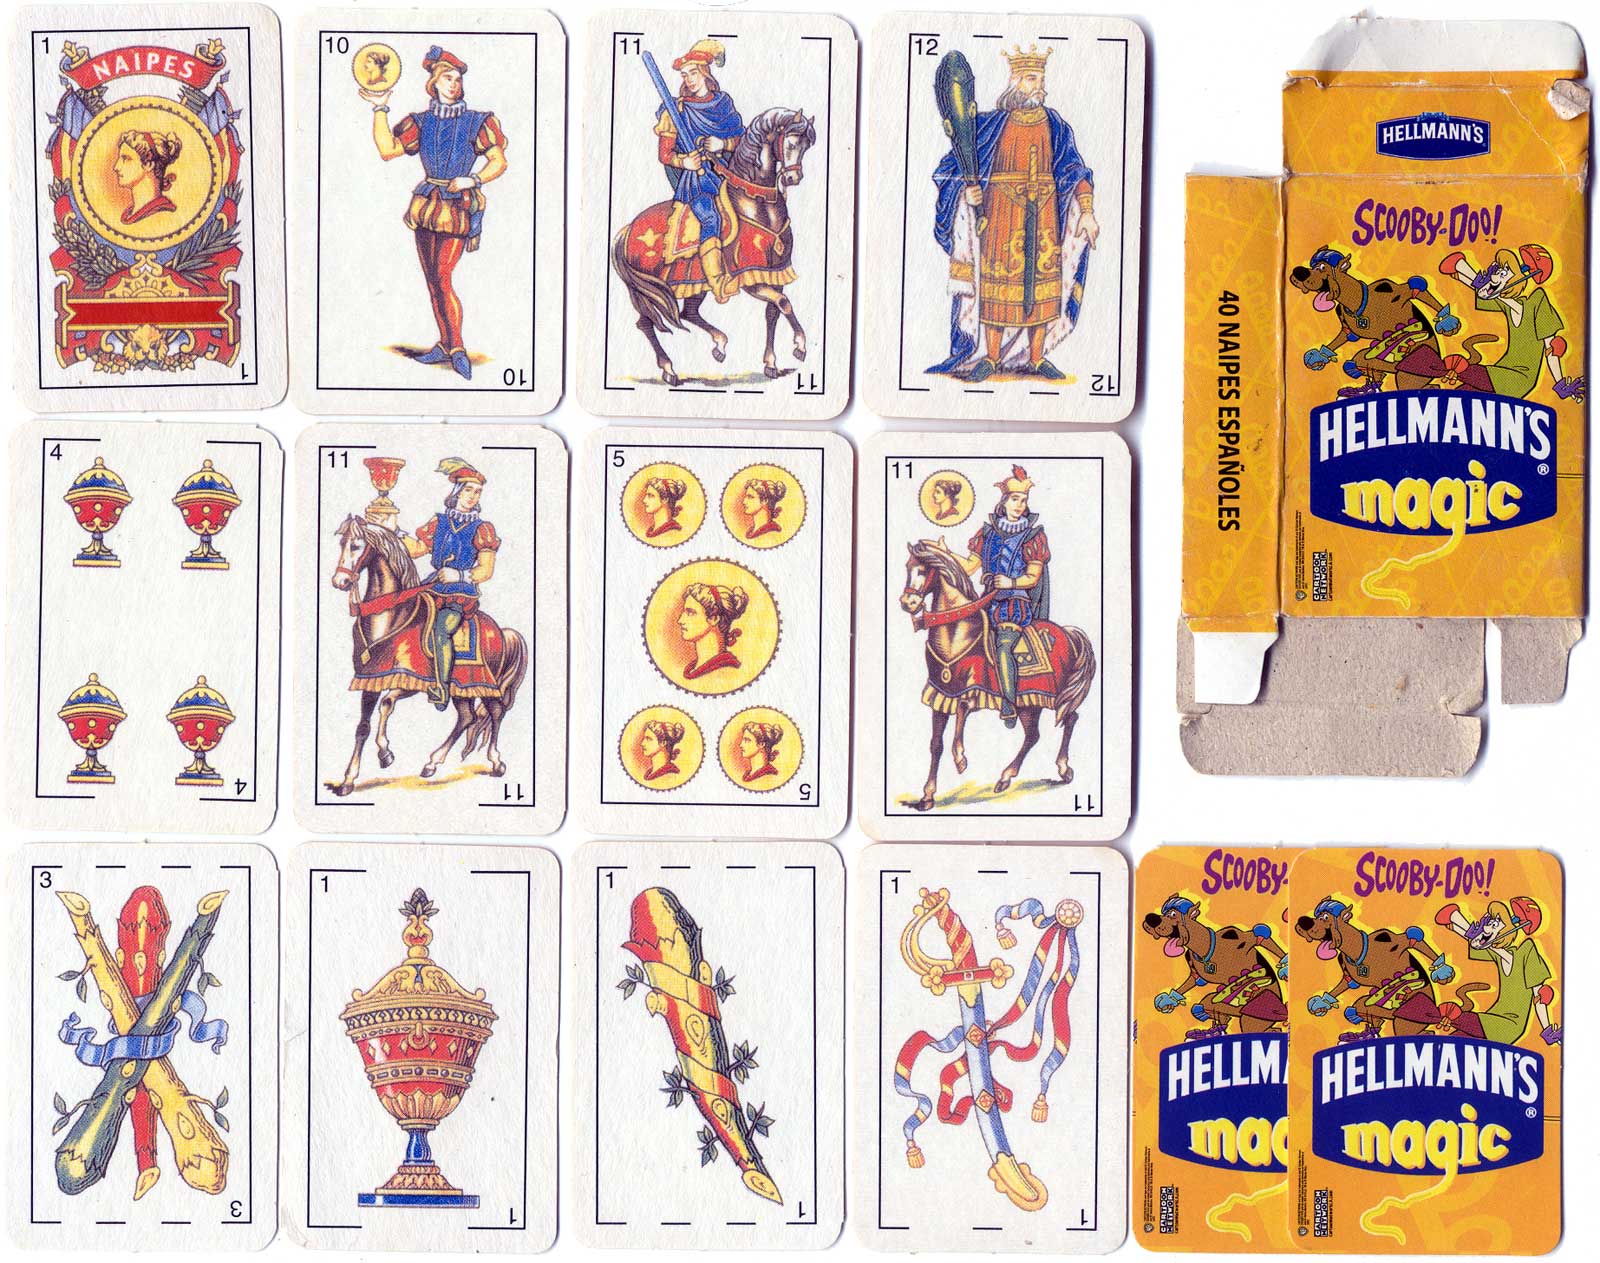 Scooby-Doo! playing cards for Hellmann's Magic